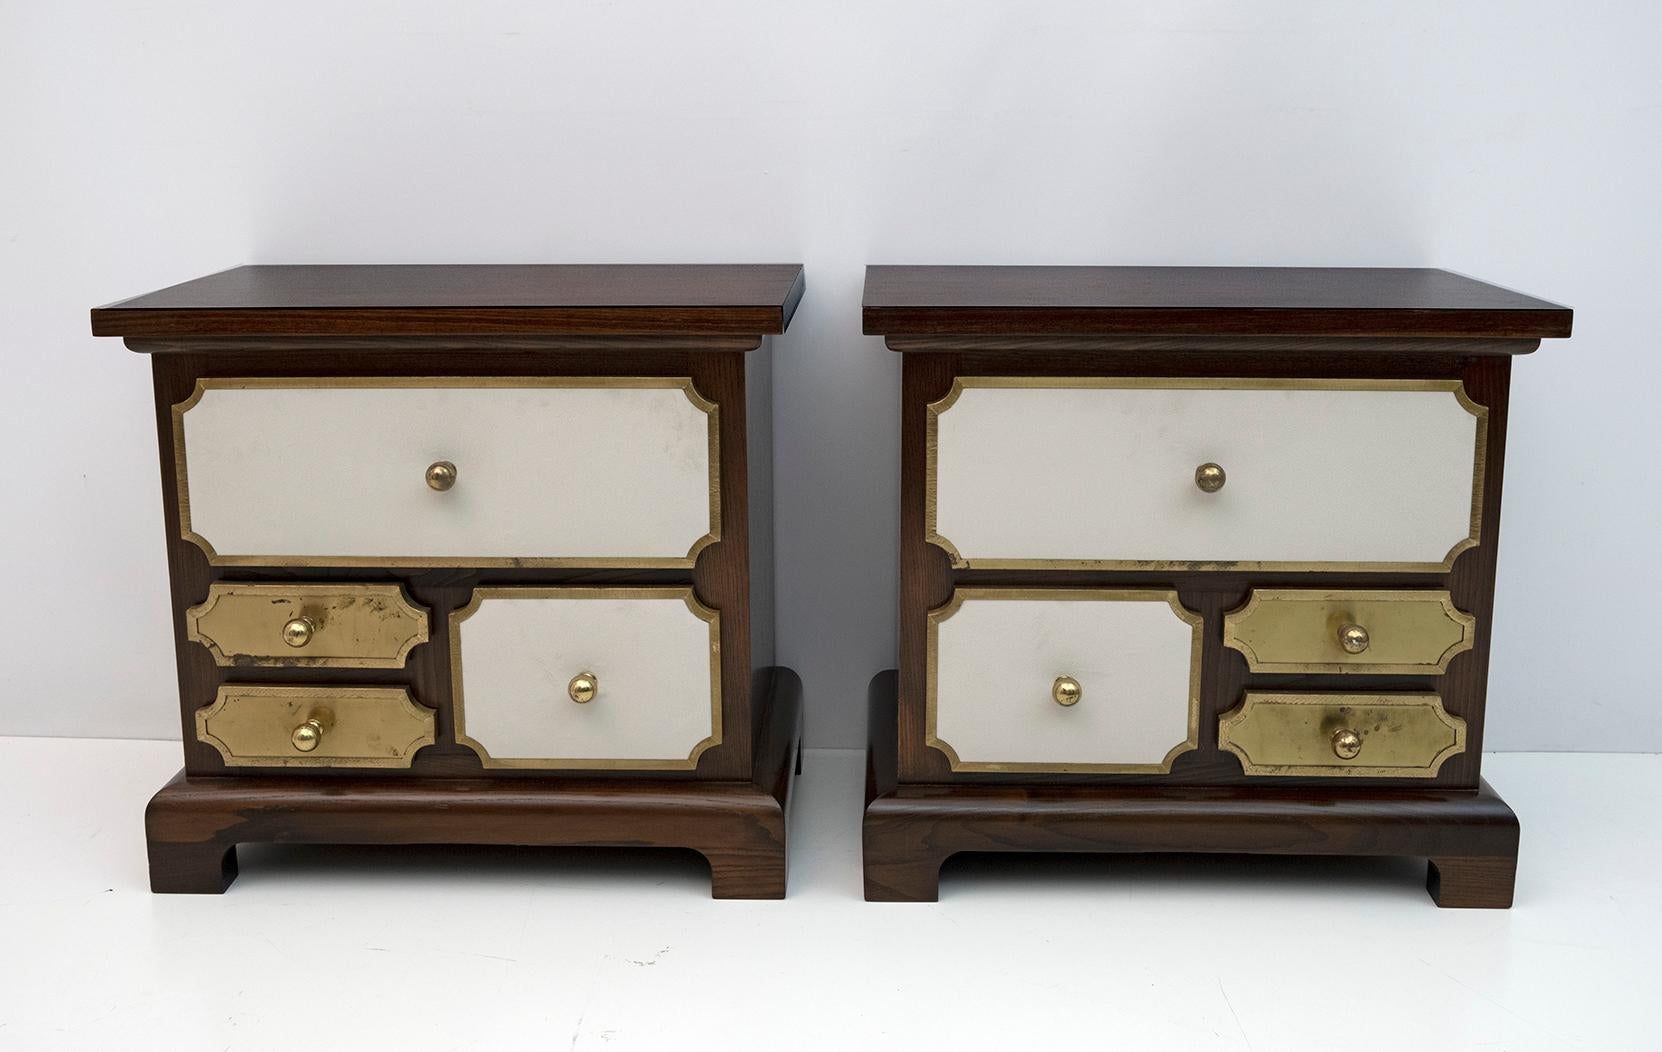 Set designed by Luciano Frigerio in the 60s, consisting of two bedside tables and chest of drawers. Solid walnut set, drawers with brass frames and ivory velvet upholstery, the whole set has been completely restored and polished with shellac. The